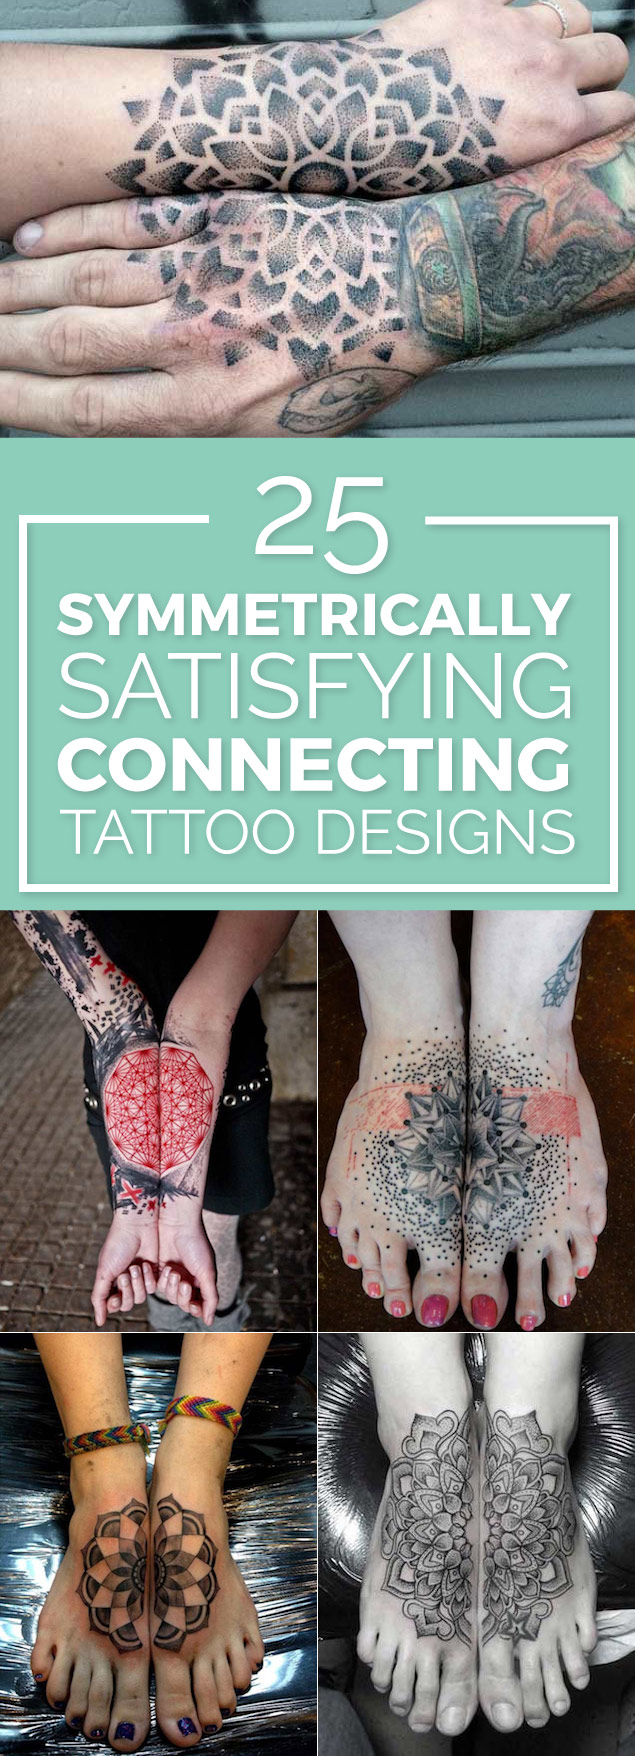 Symmetrical Tattoo Designs you NEED to see